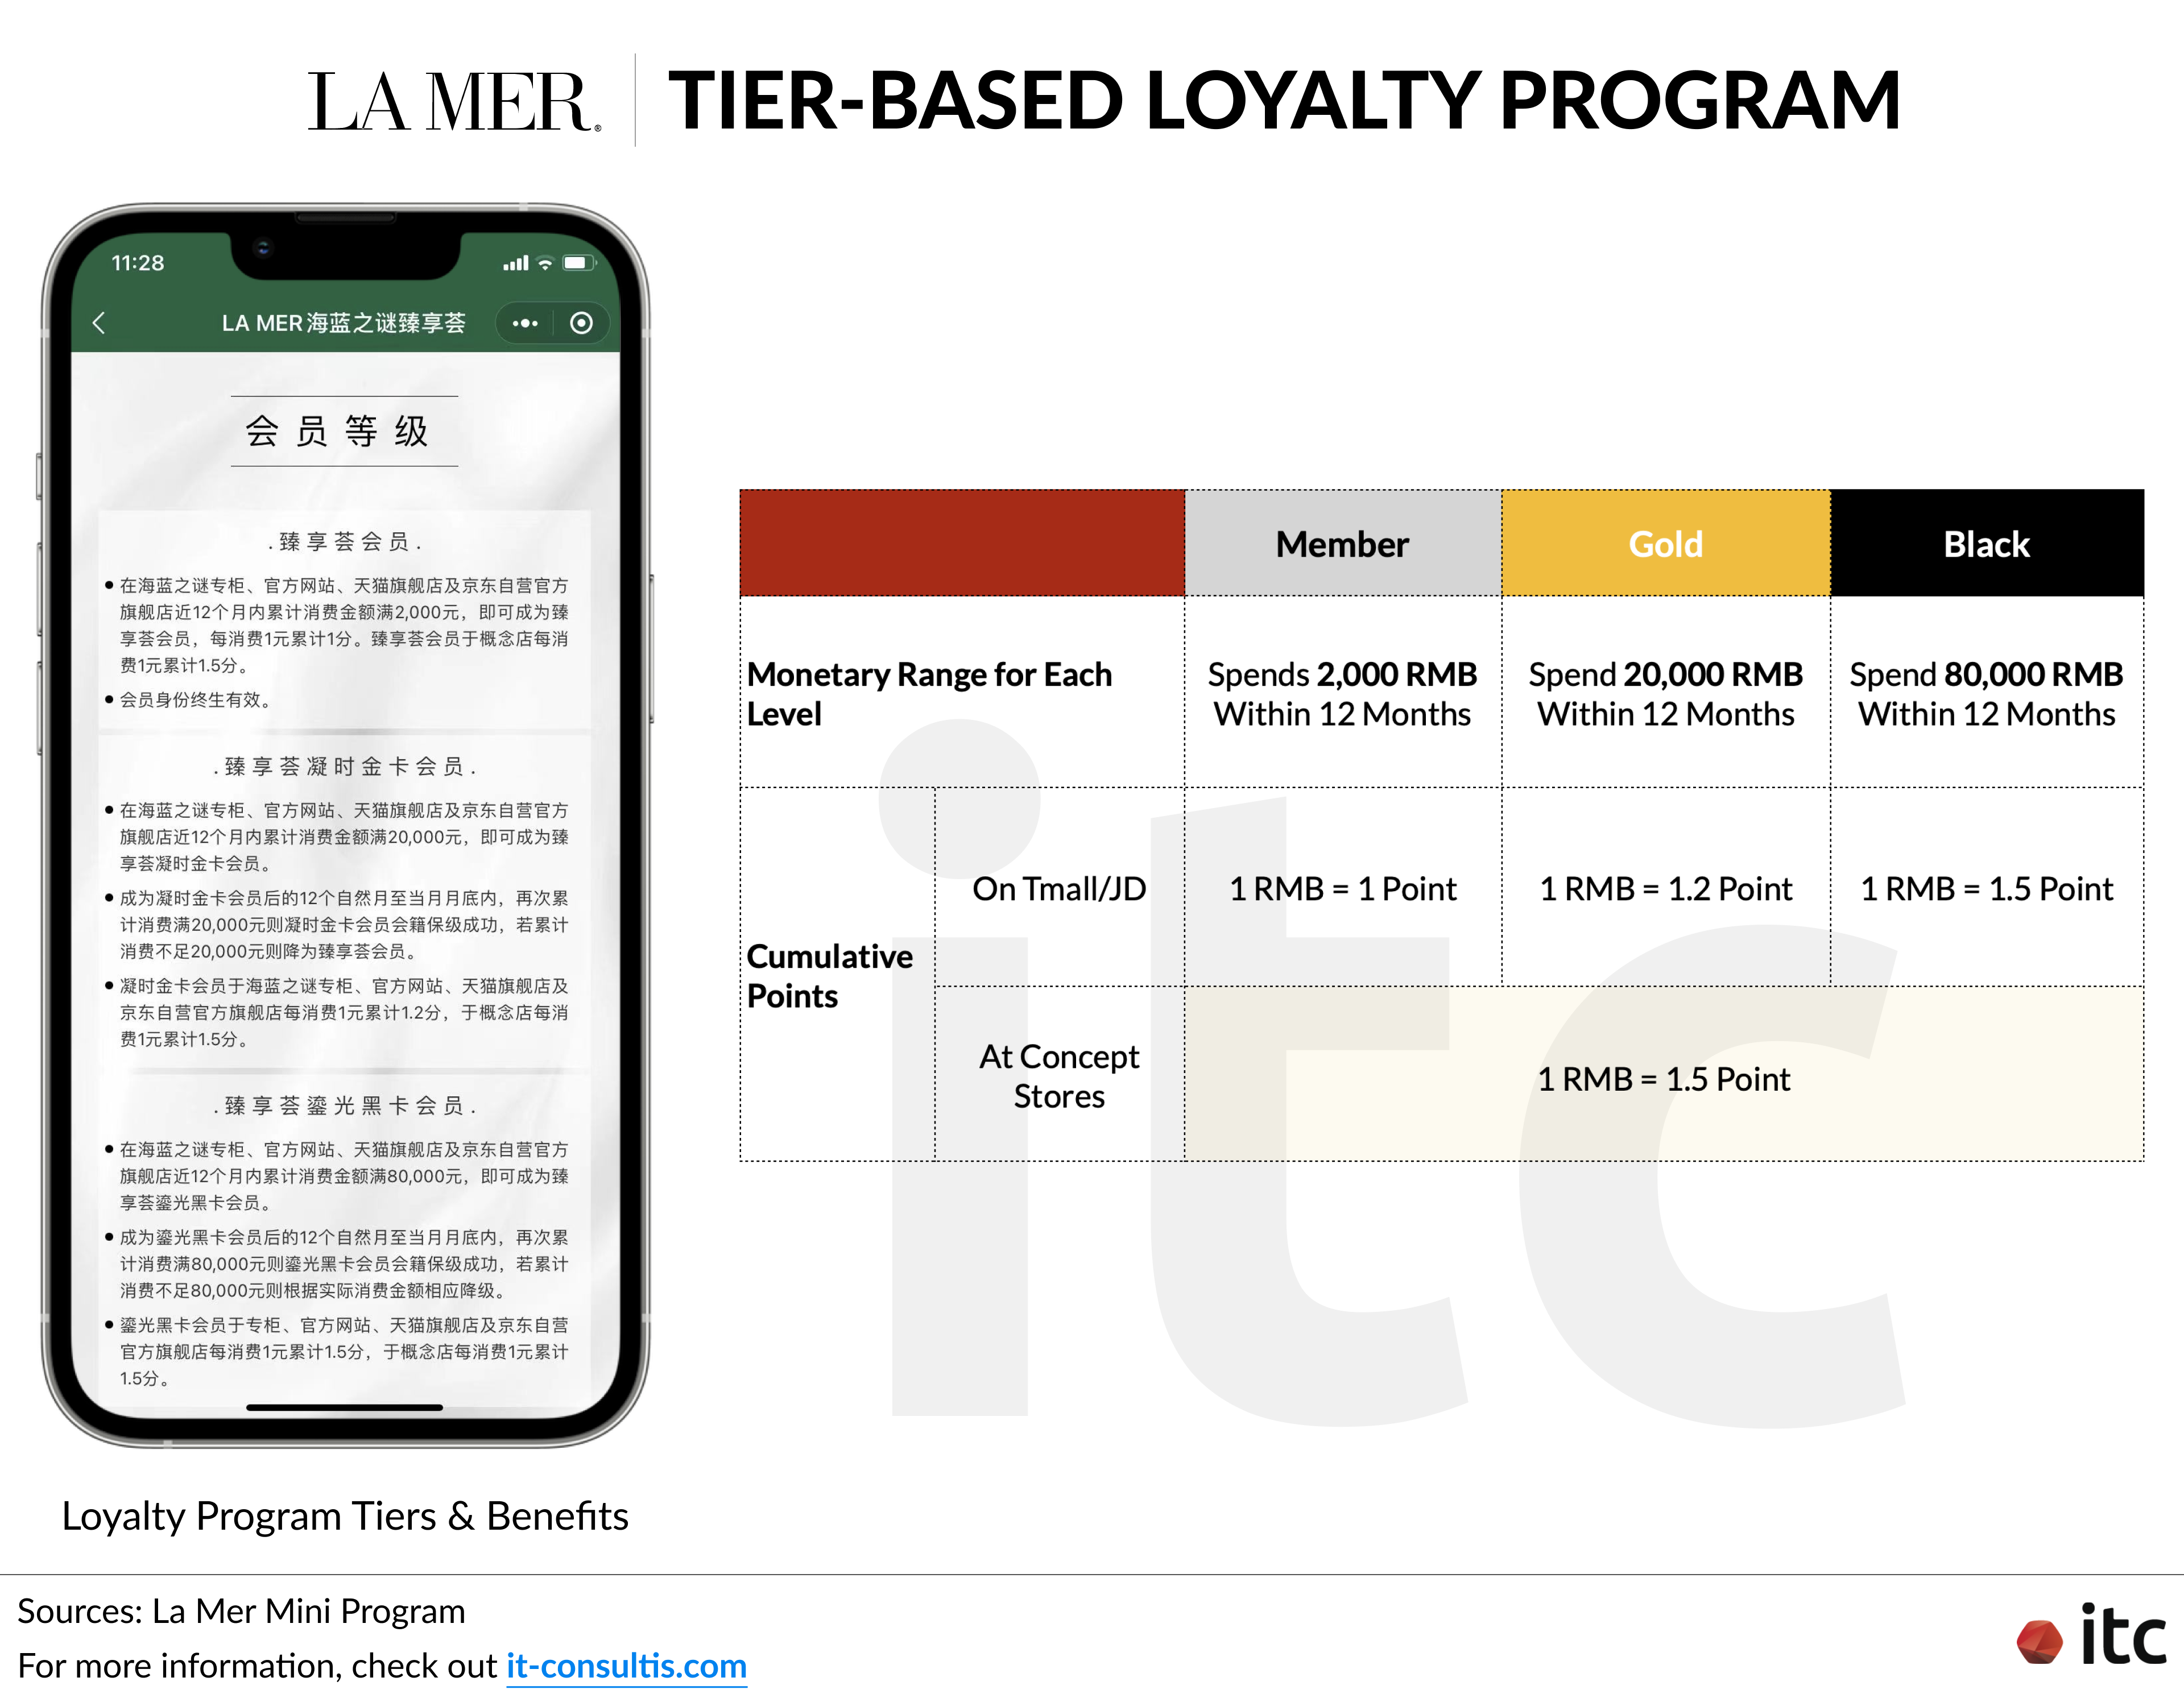 For its loyalty program, the luxury brand La Mer distributes more points to purchases made in-store than online